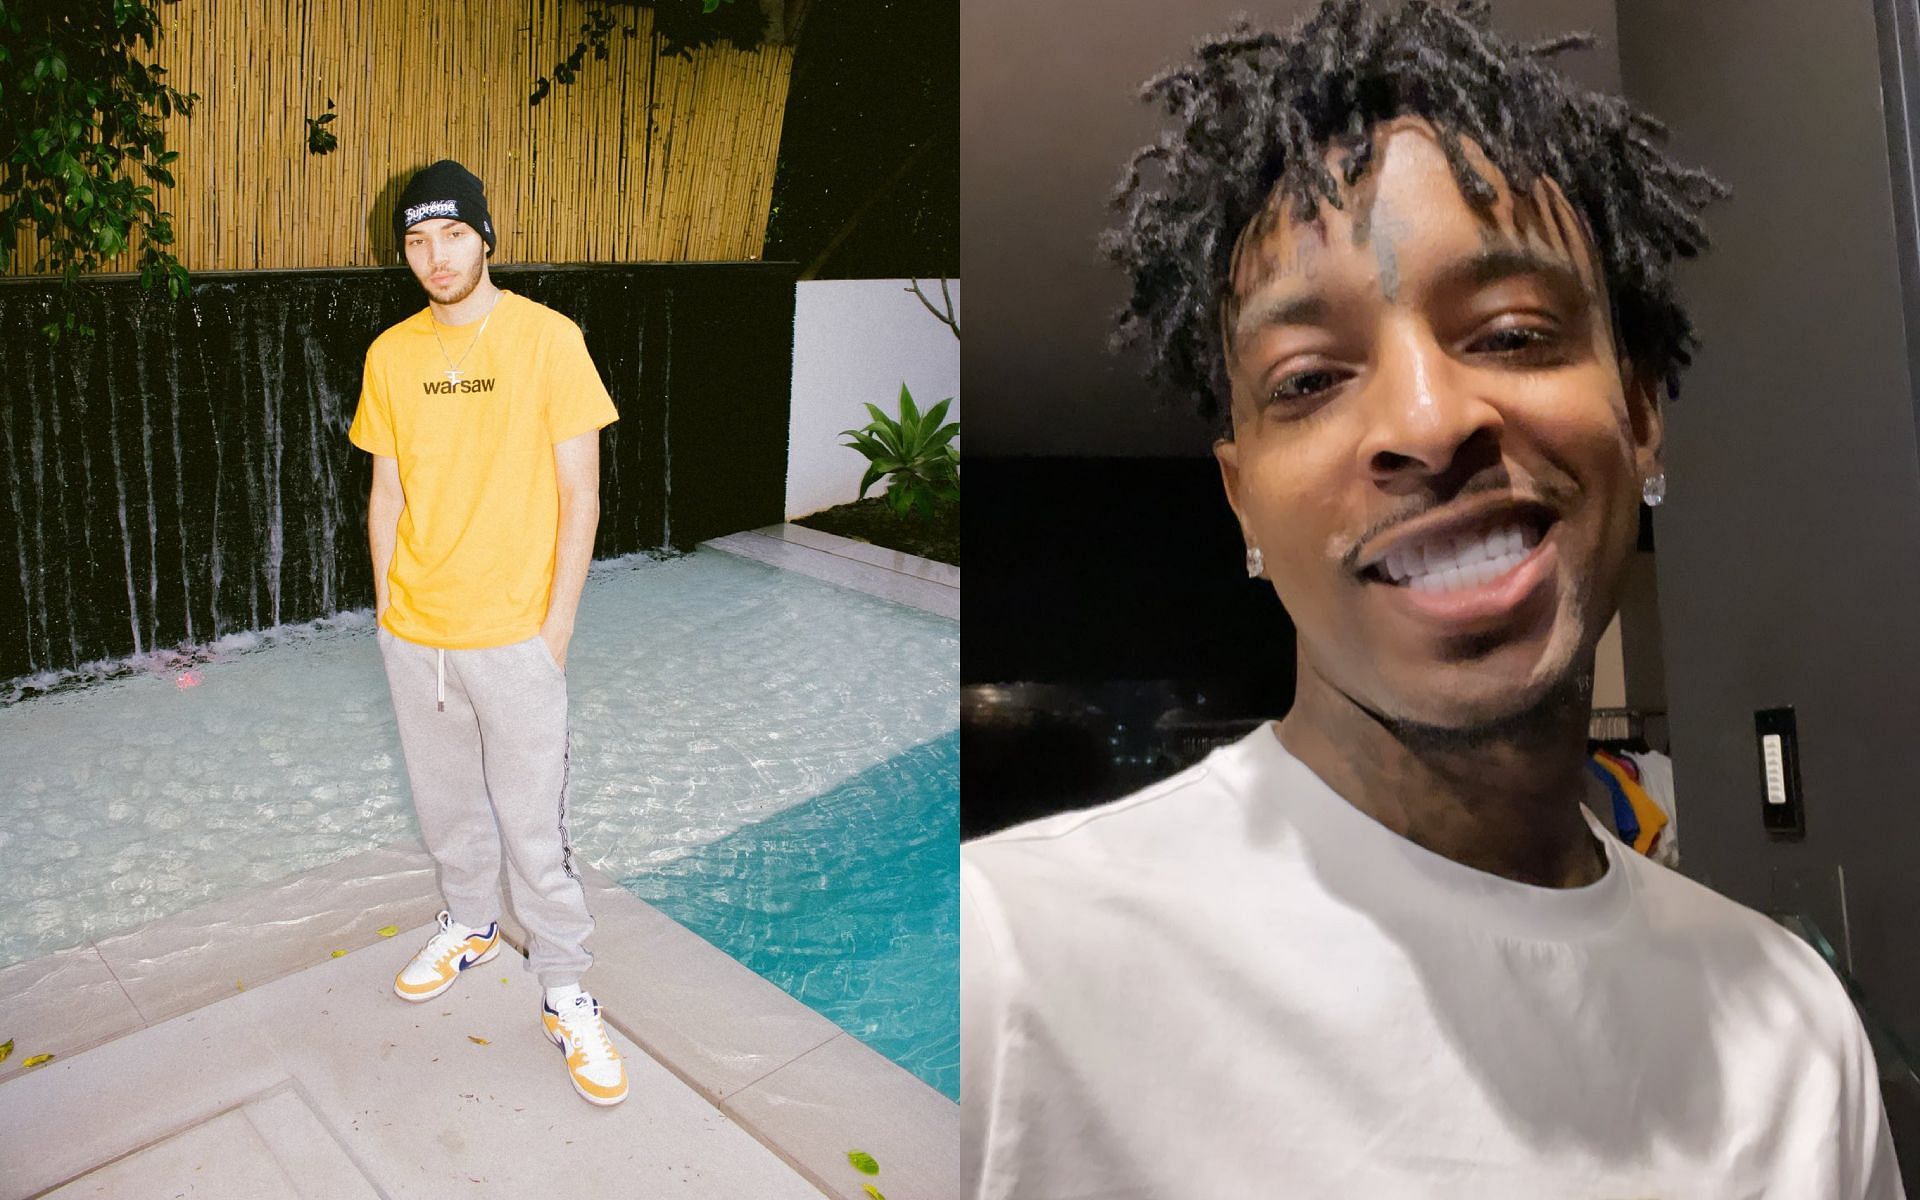 Adin Ross reveals 21 Savage apologized to him following the alleged cheating scandal (Image via @adinross and @21savage/X)